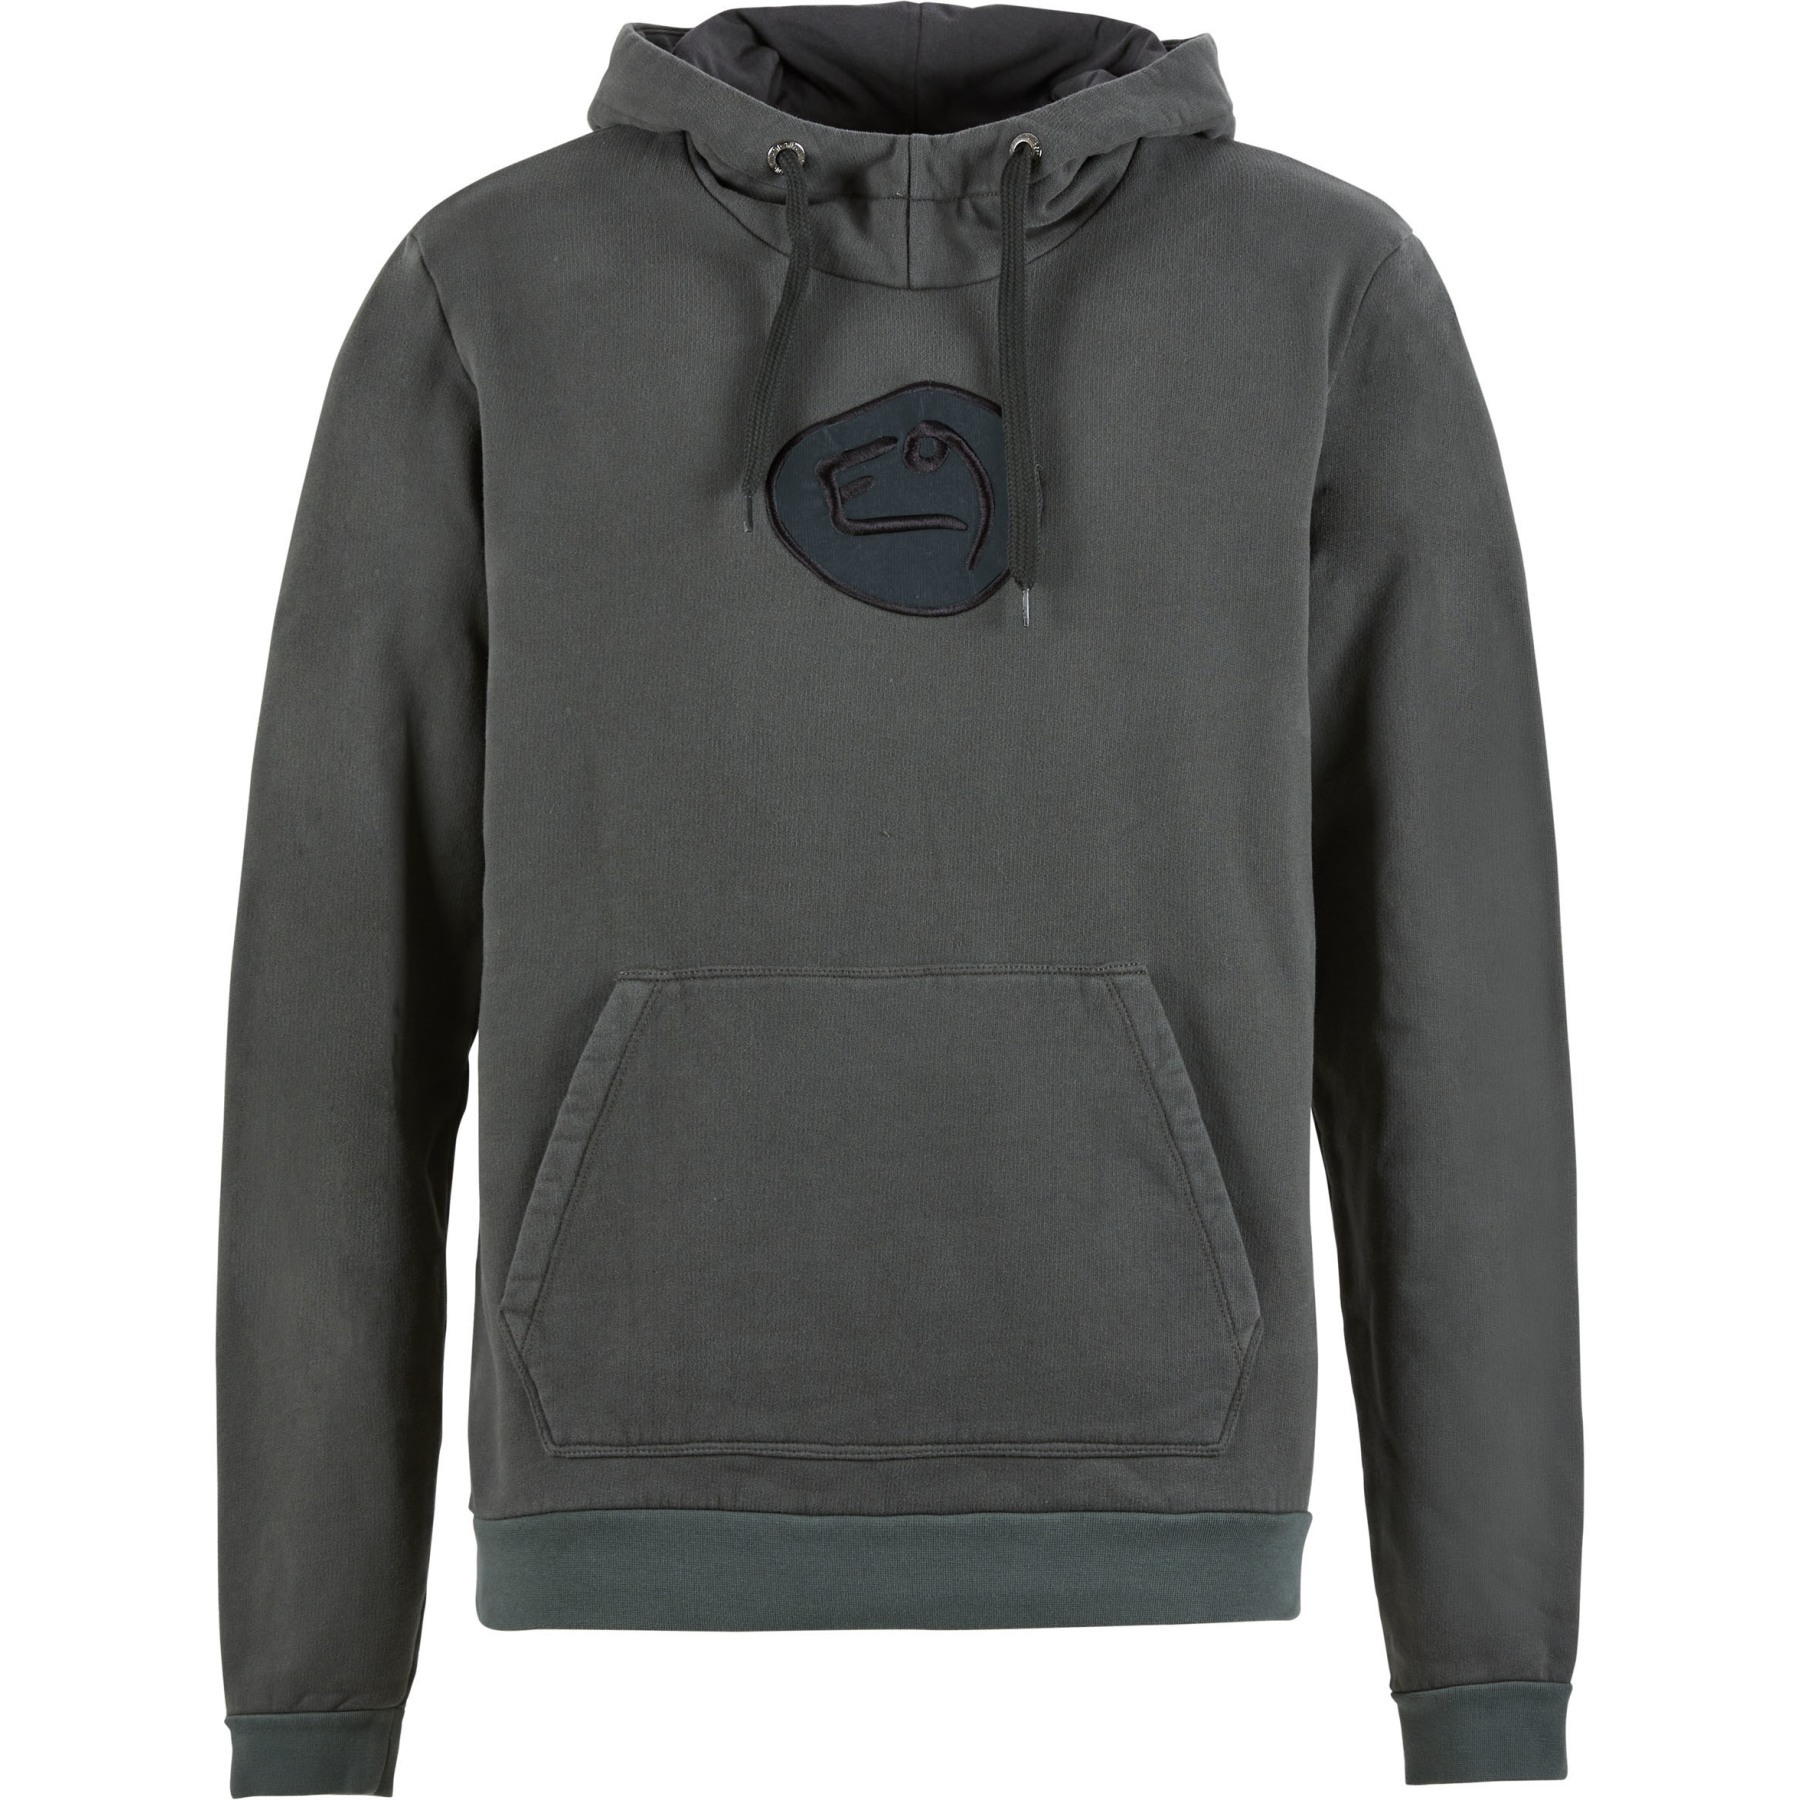 Picture of E9 Bubble2.2 Hoodie Men - Woodland